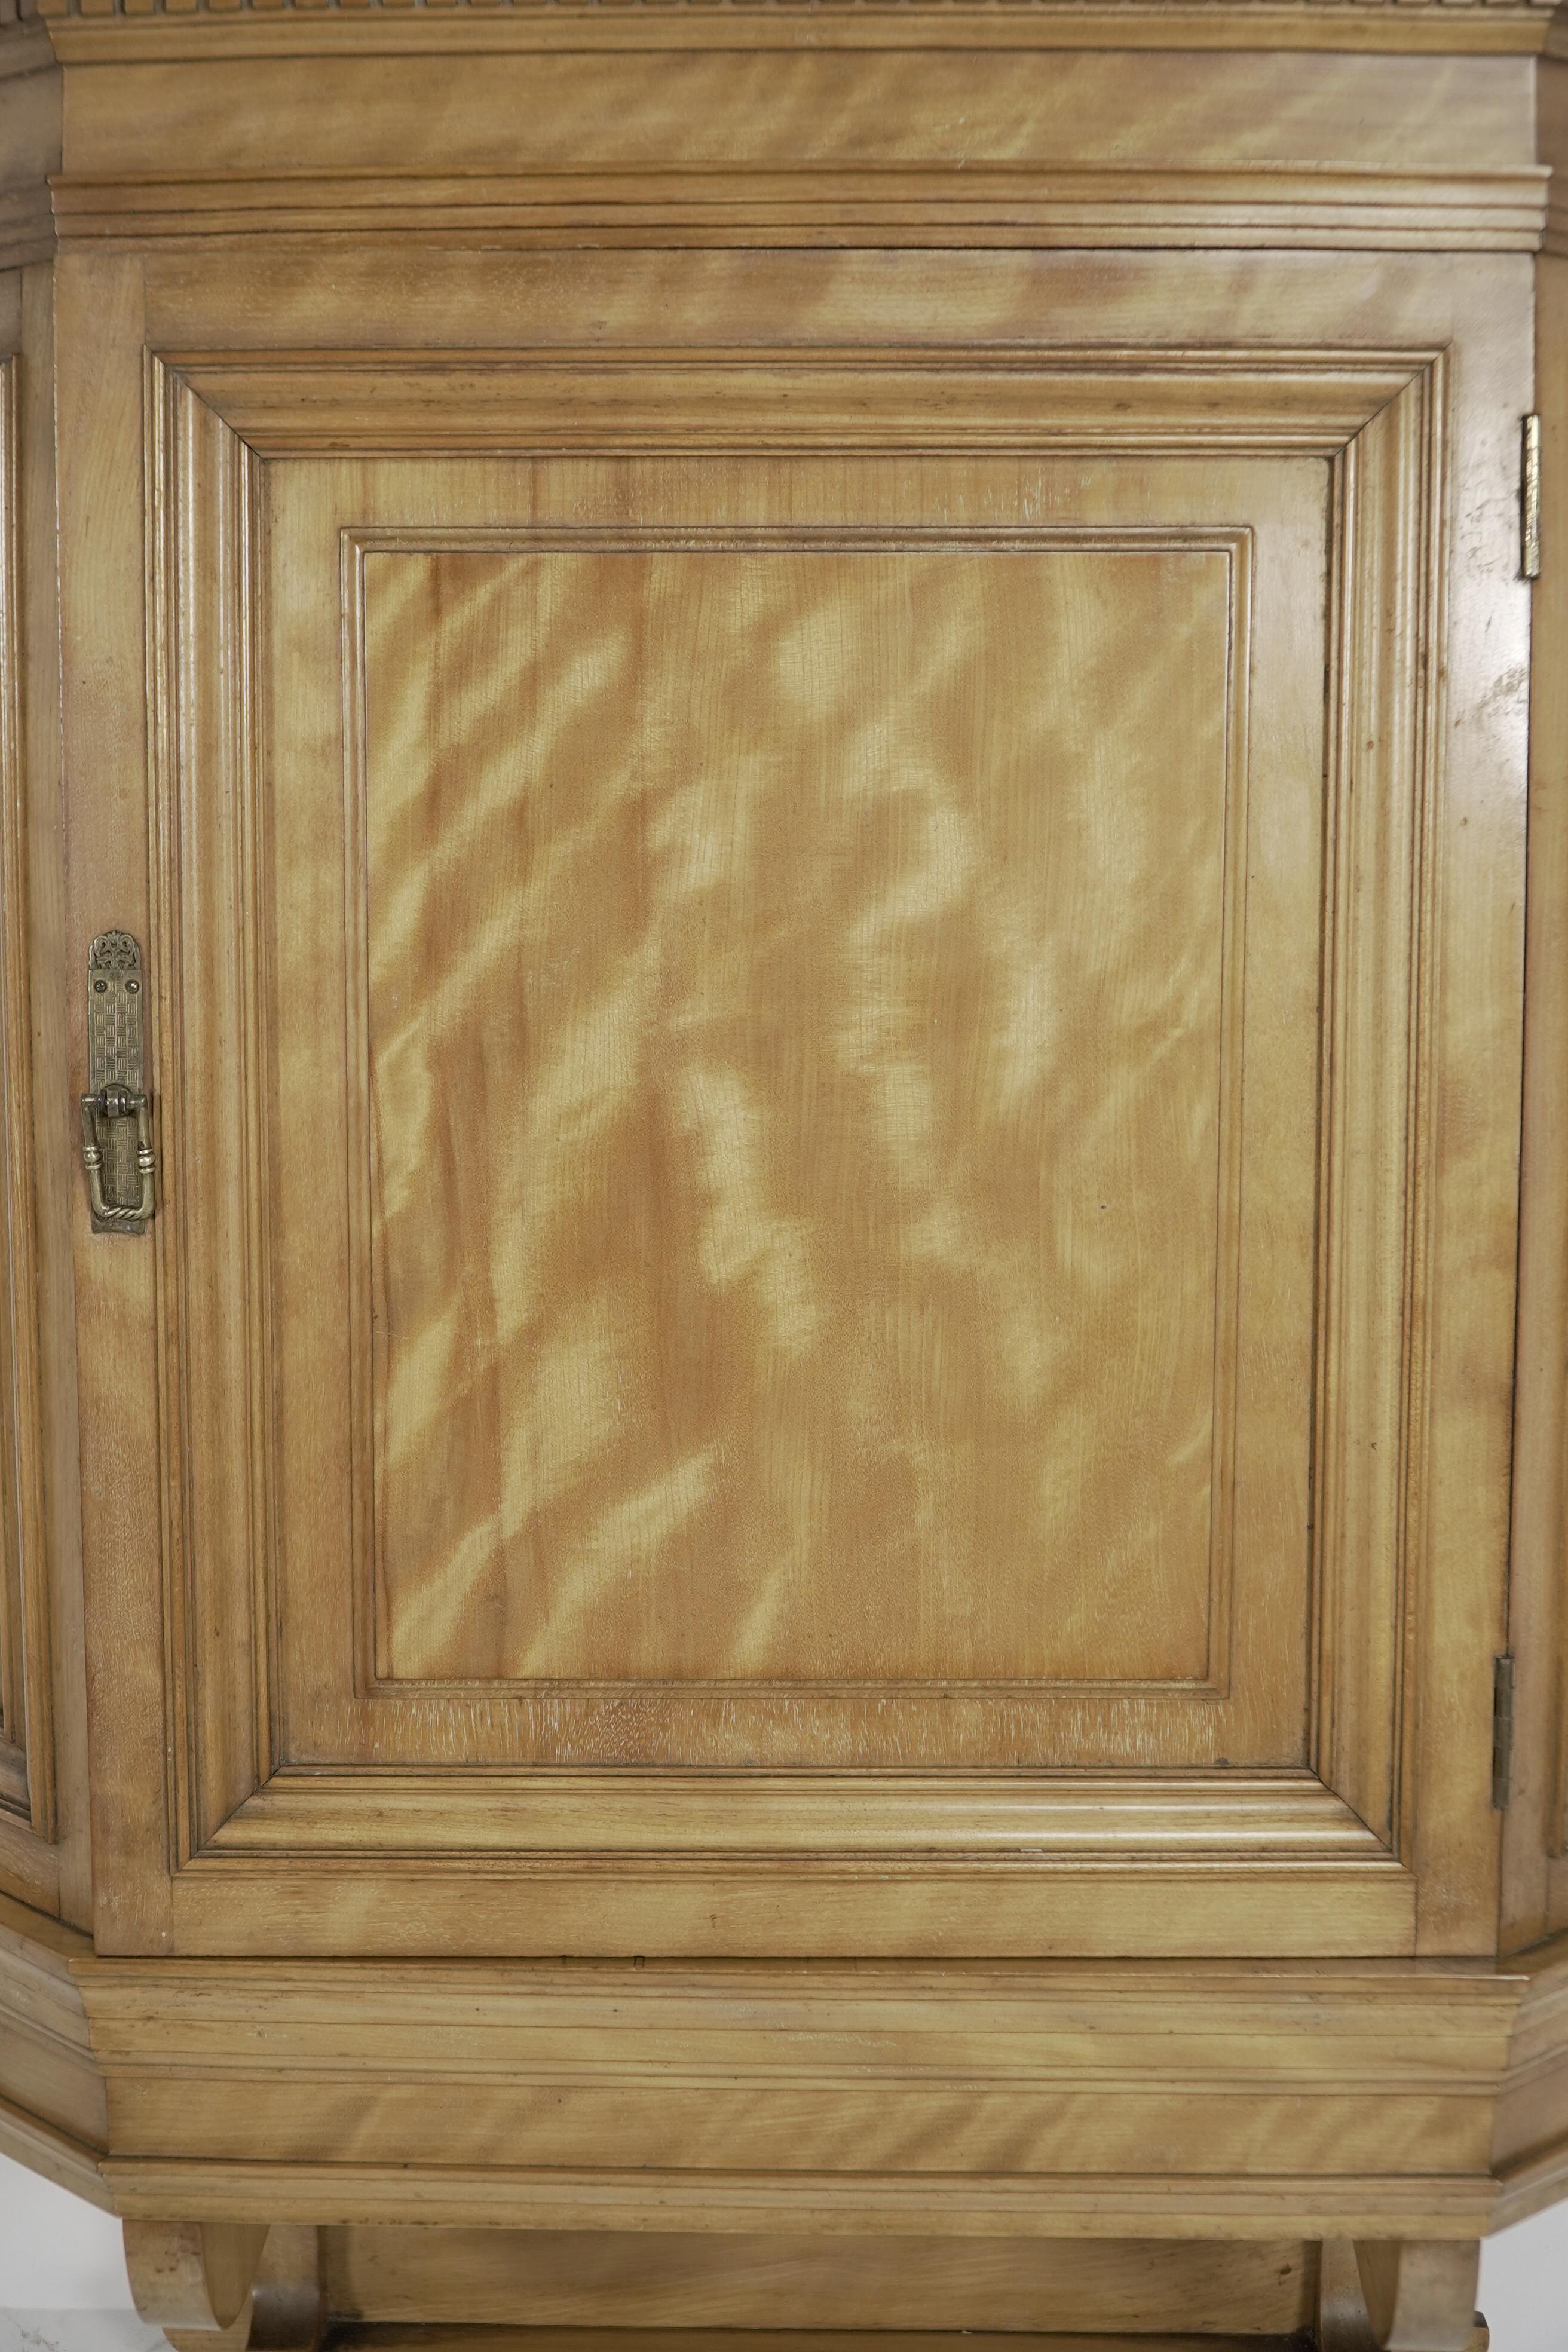 Walnut Collinson and Lock. An Aesthetic Movement Satin walnut breakfront wall cupboard For Sale